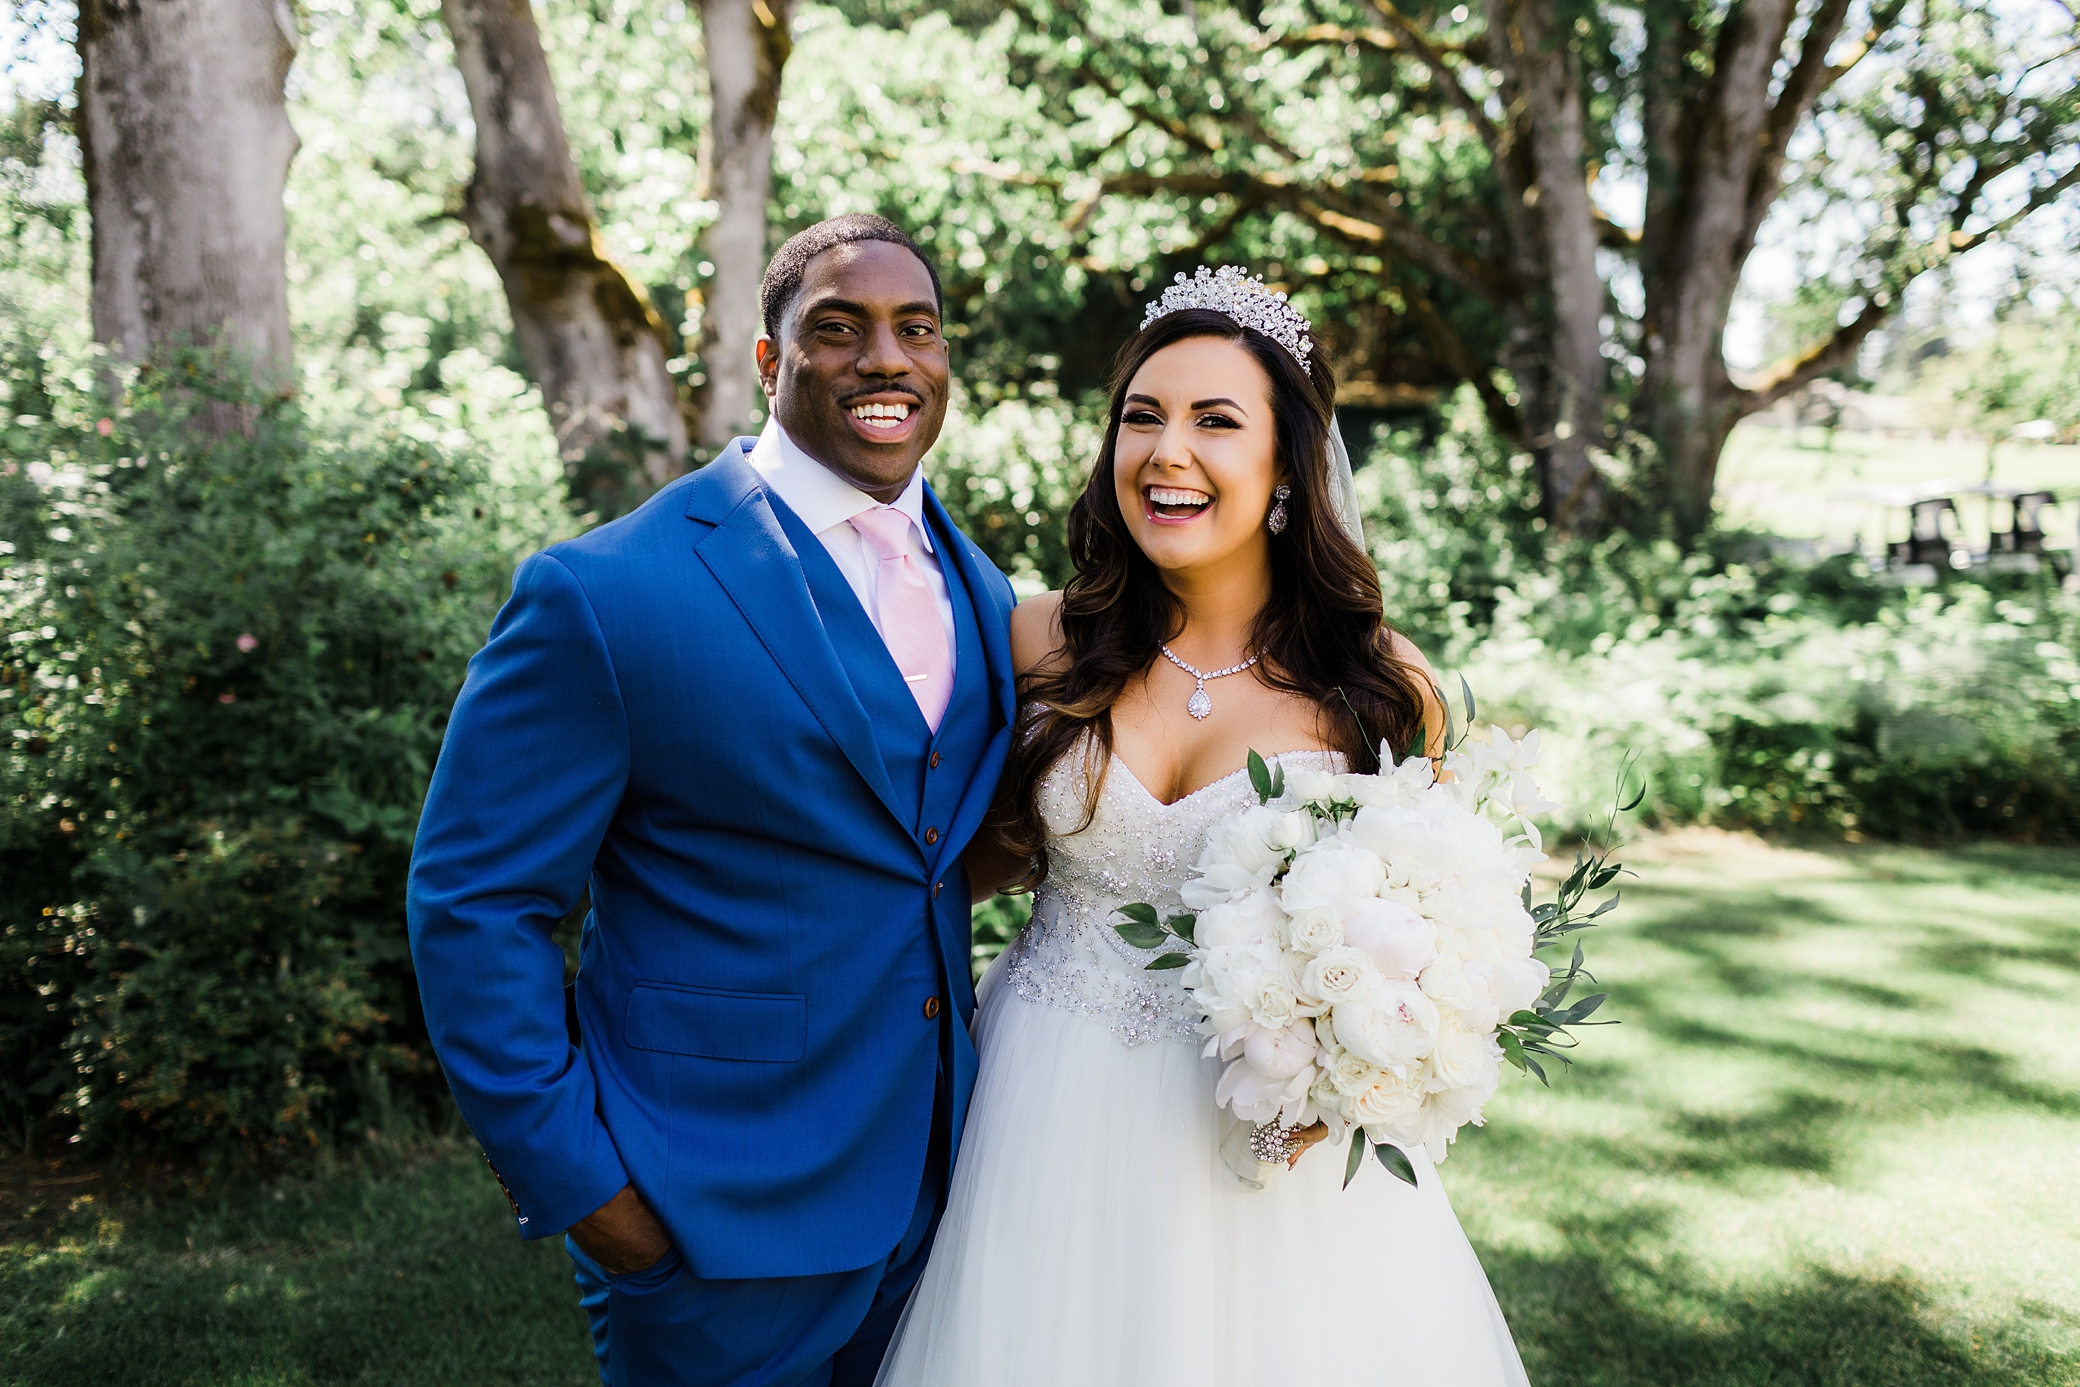 Bride and groom on their wedding day | Megan Montalvo Photography